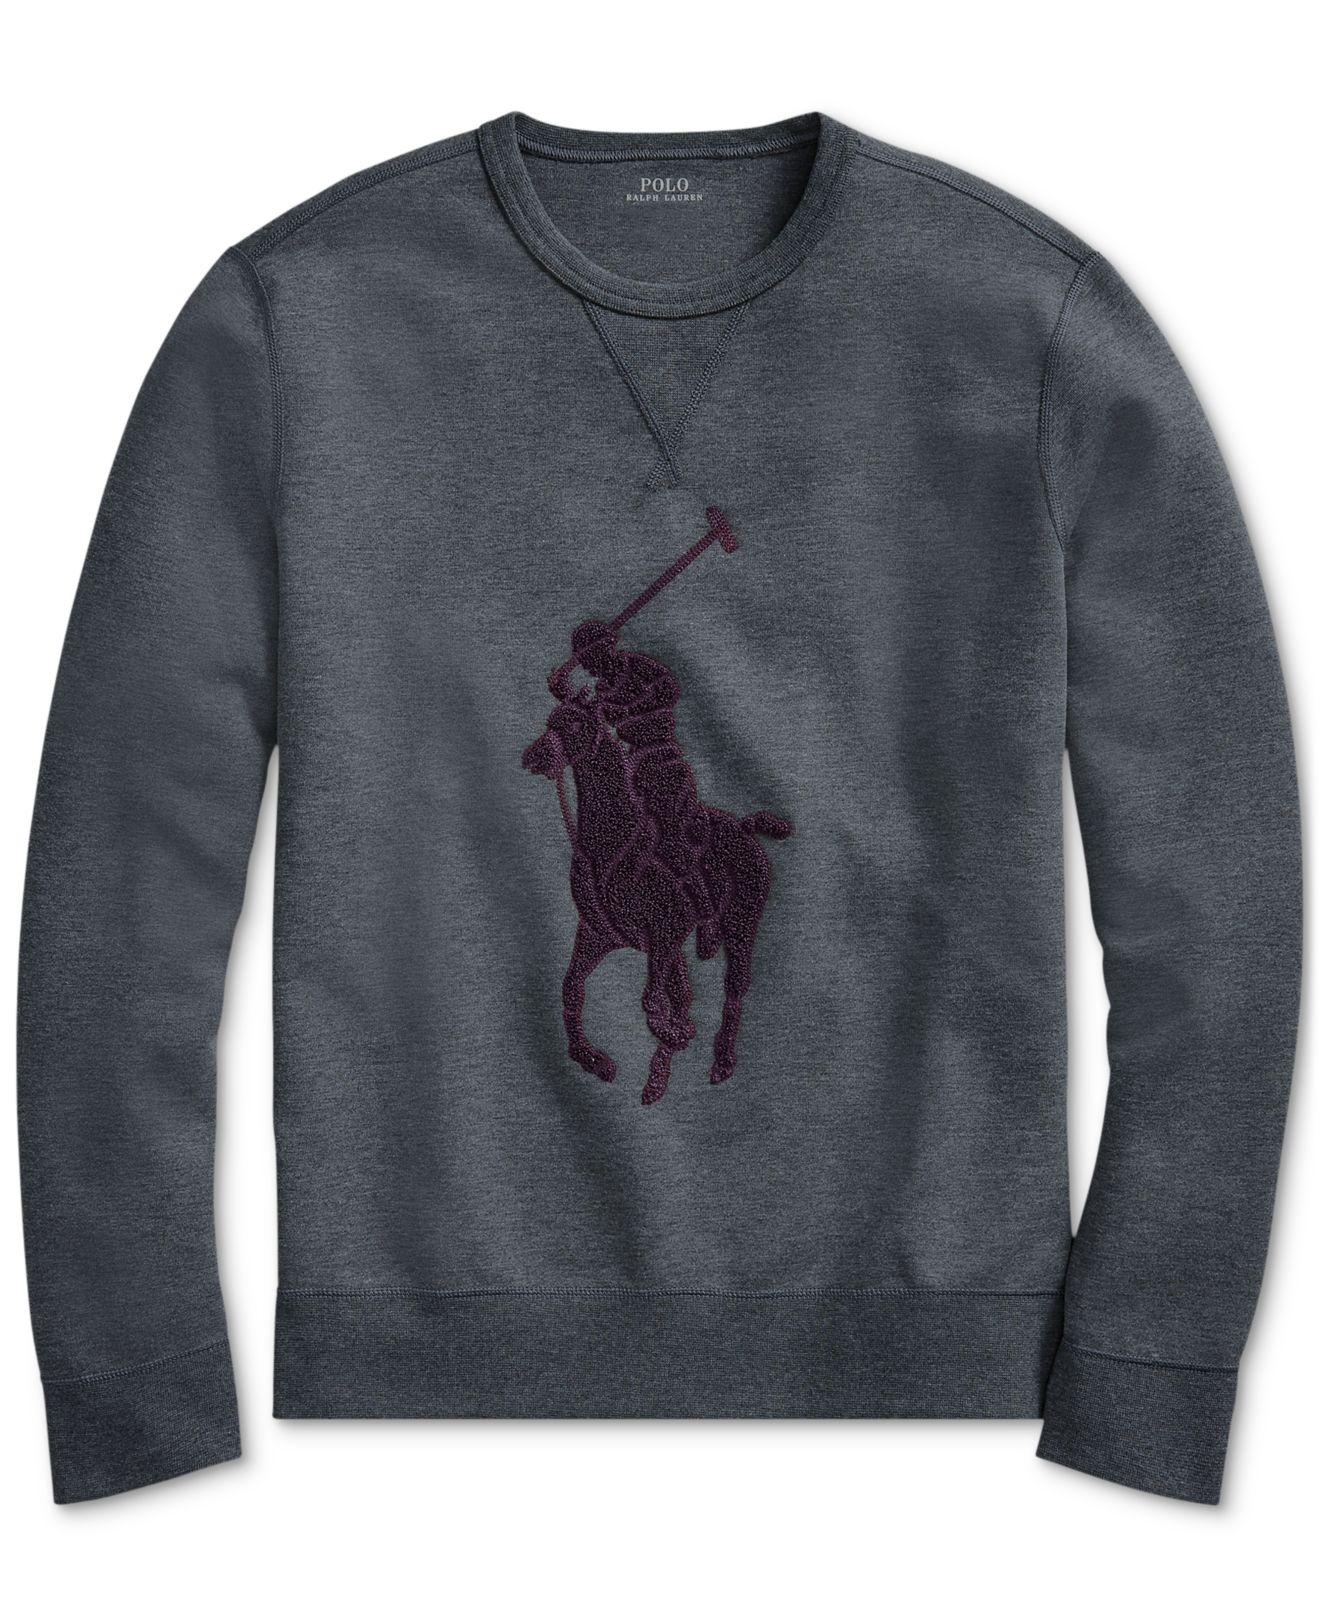 Download Polo Ralph Lauren Synthetic Double-knit Big Pony Crew Neck ...